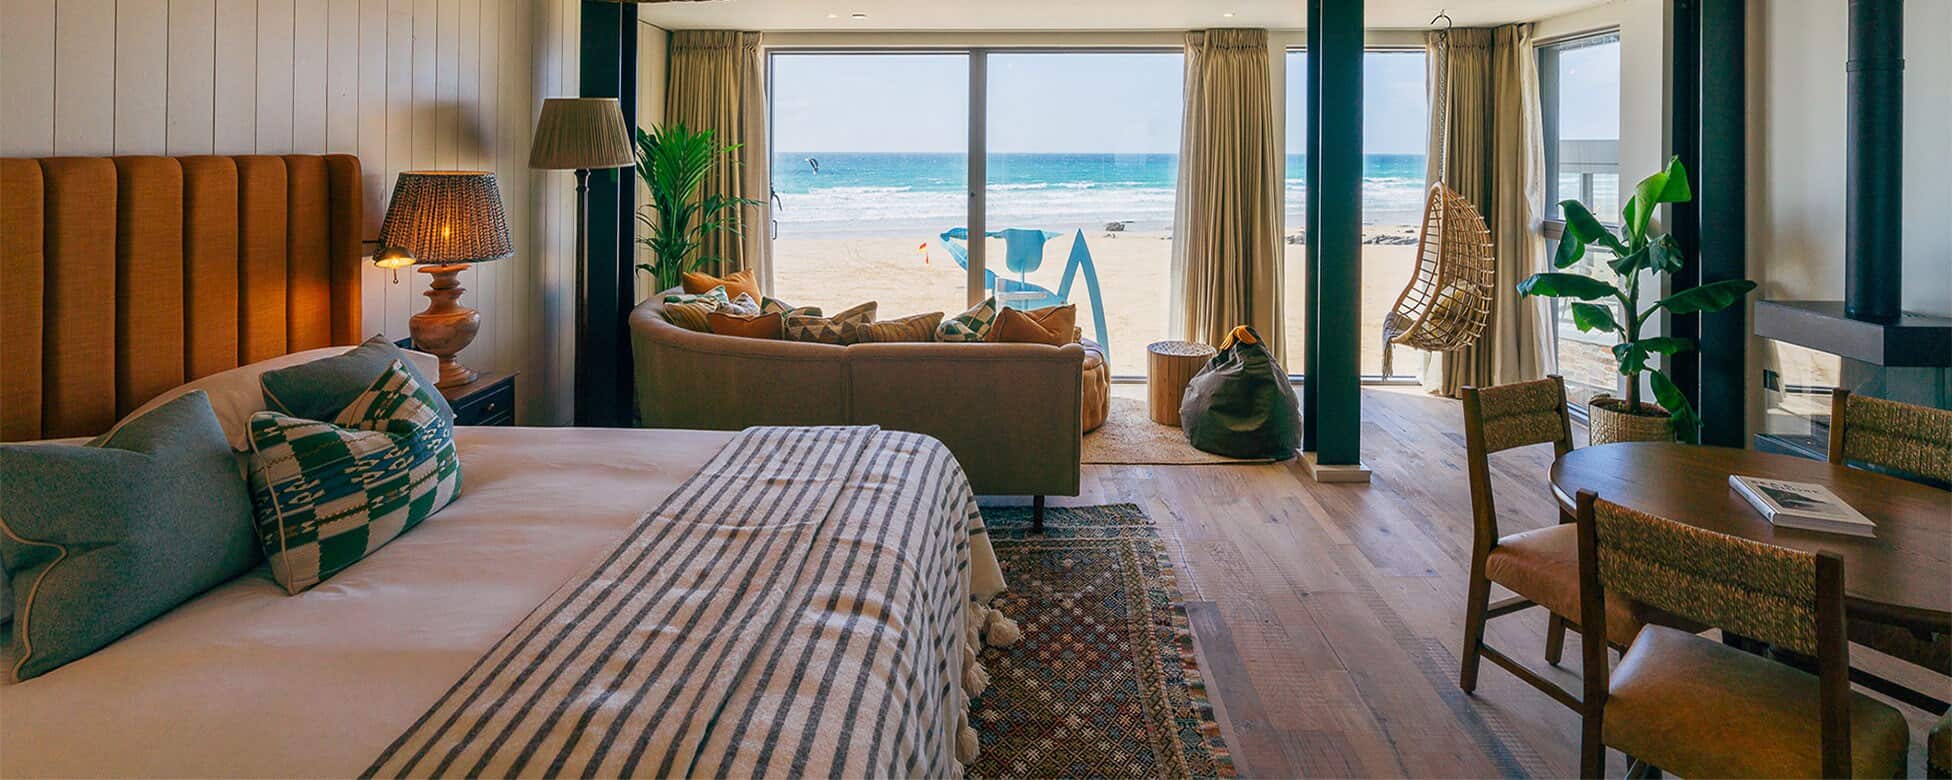 Beachfront hotel room with ocean view.